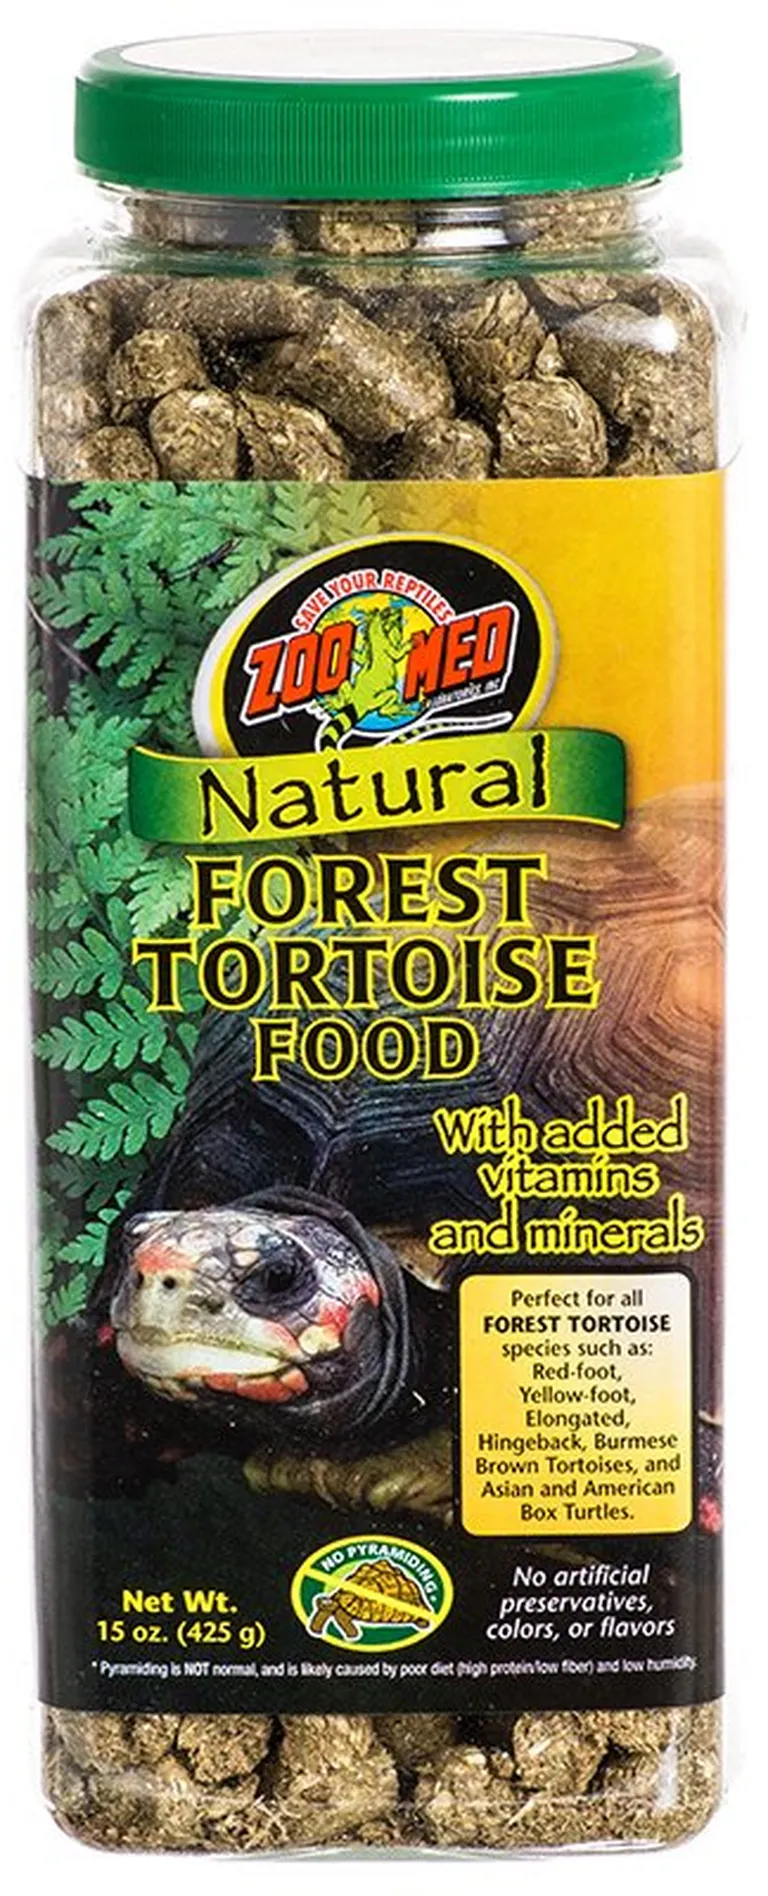 Zoo Med Natural Forest Tortoise Food Photo 1